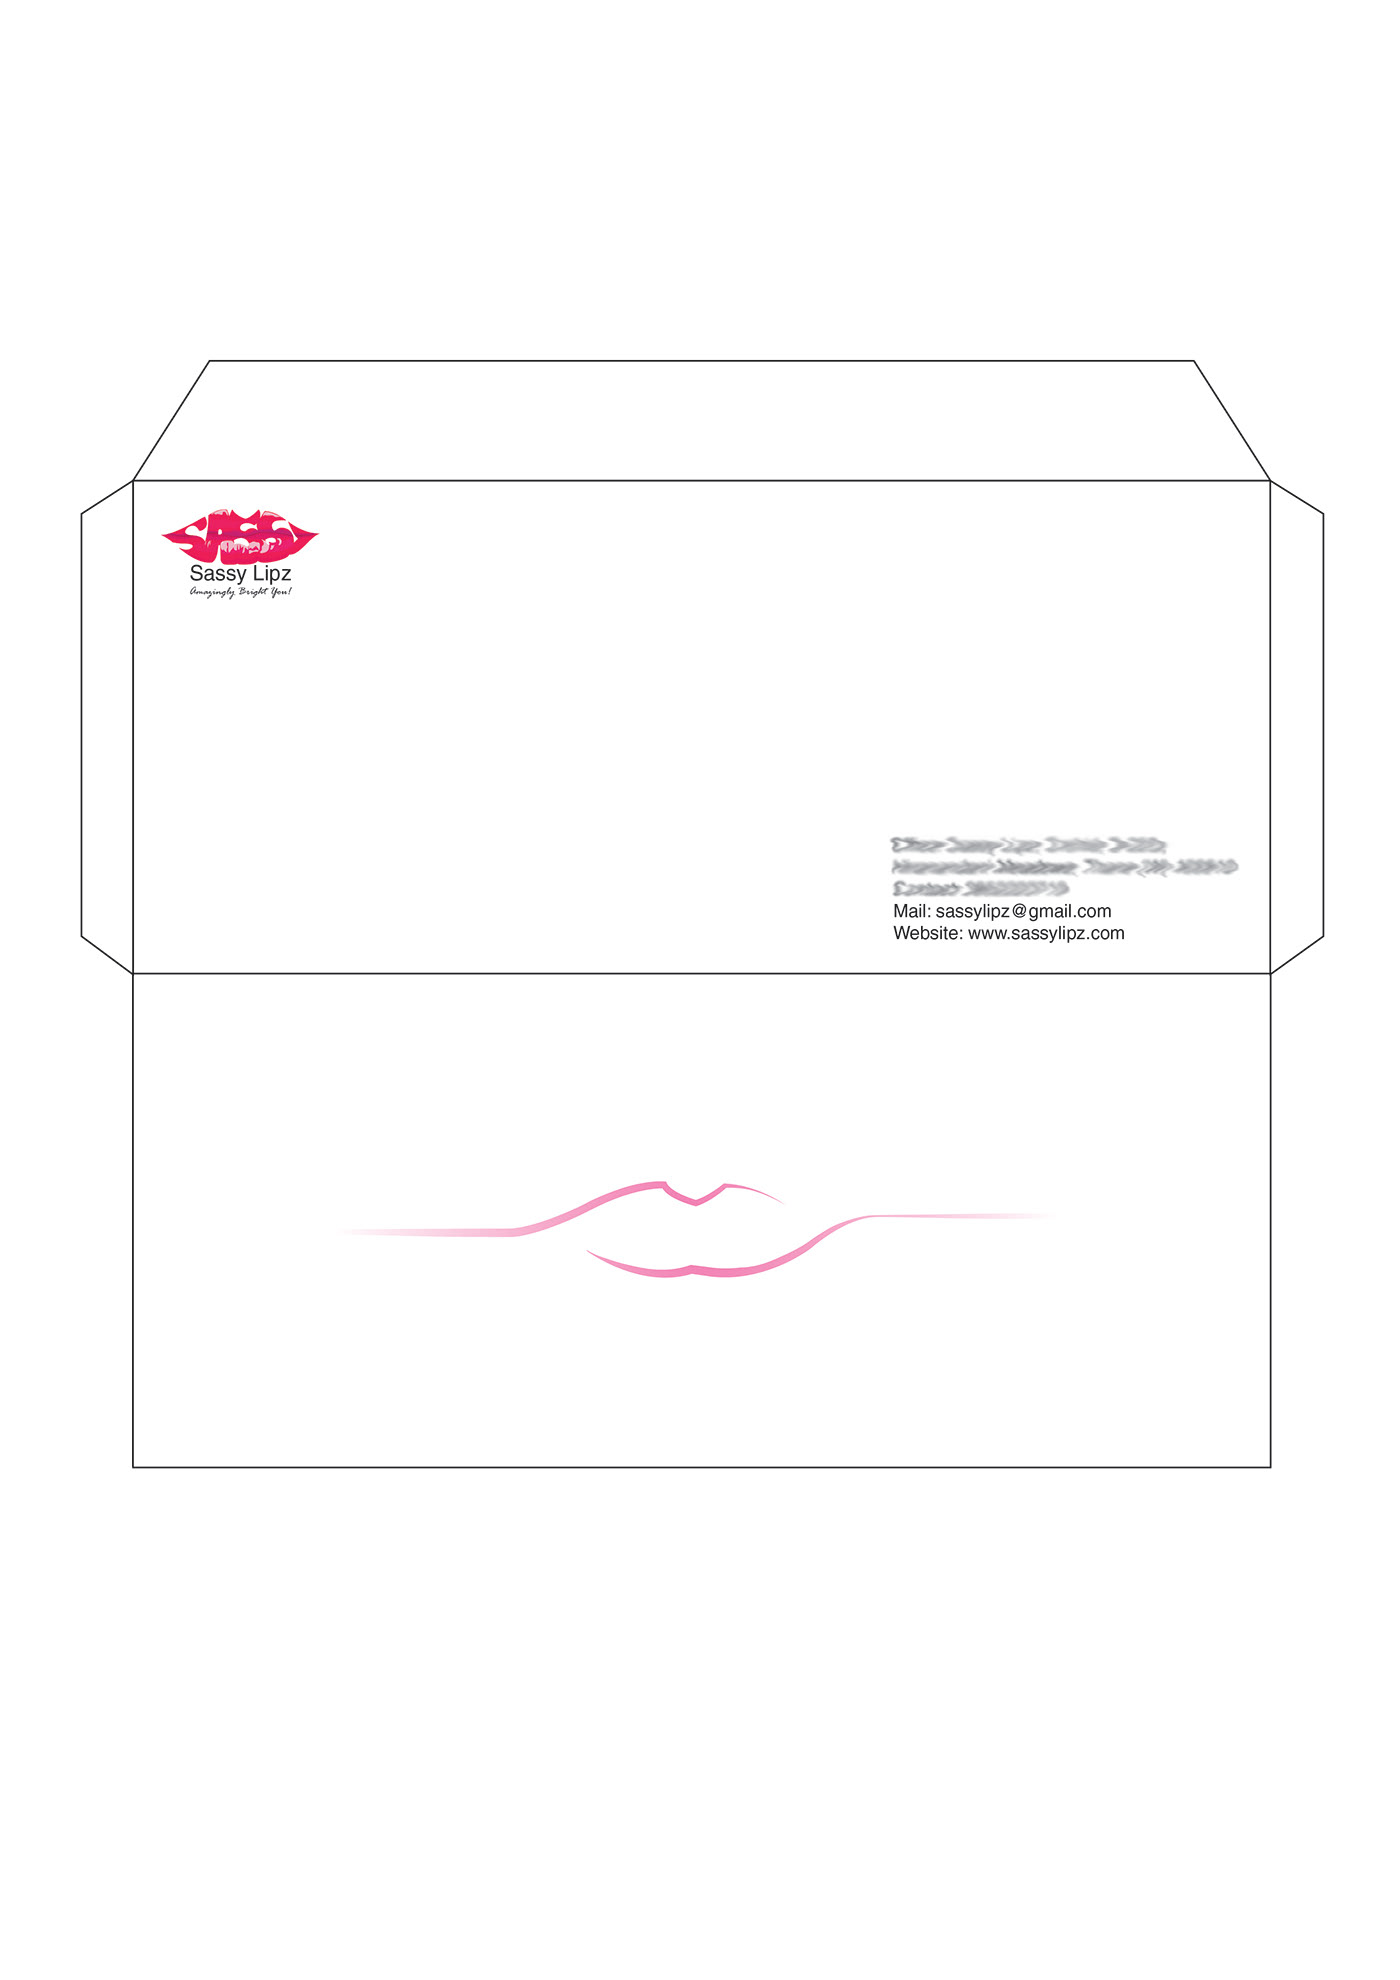 ILLUSTRATION  lips product pink lip balm idea ad letter head invelop logo visiting card